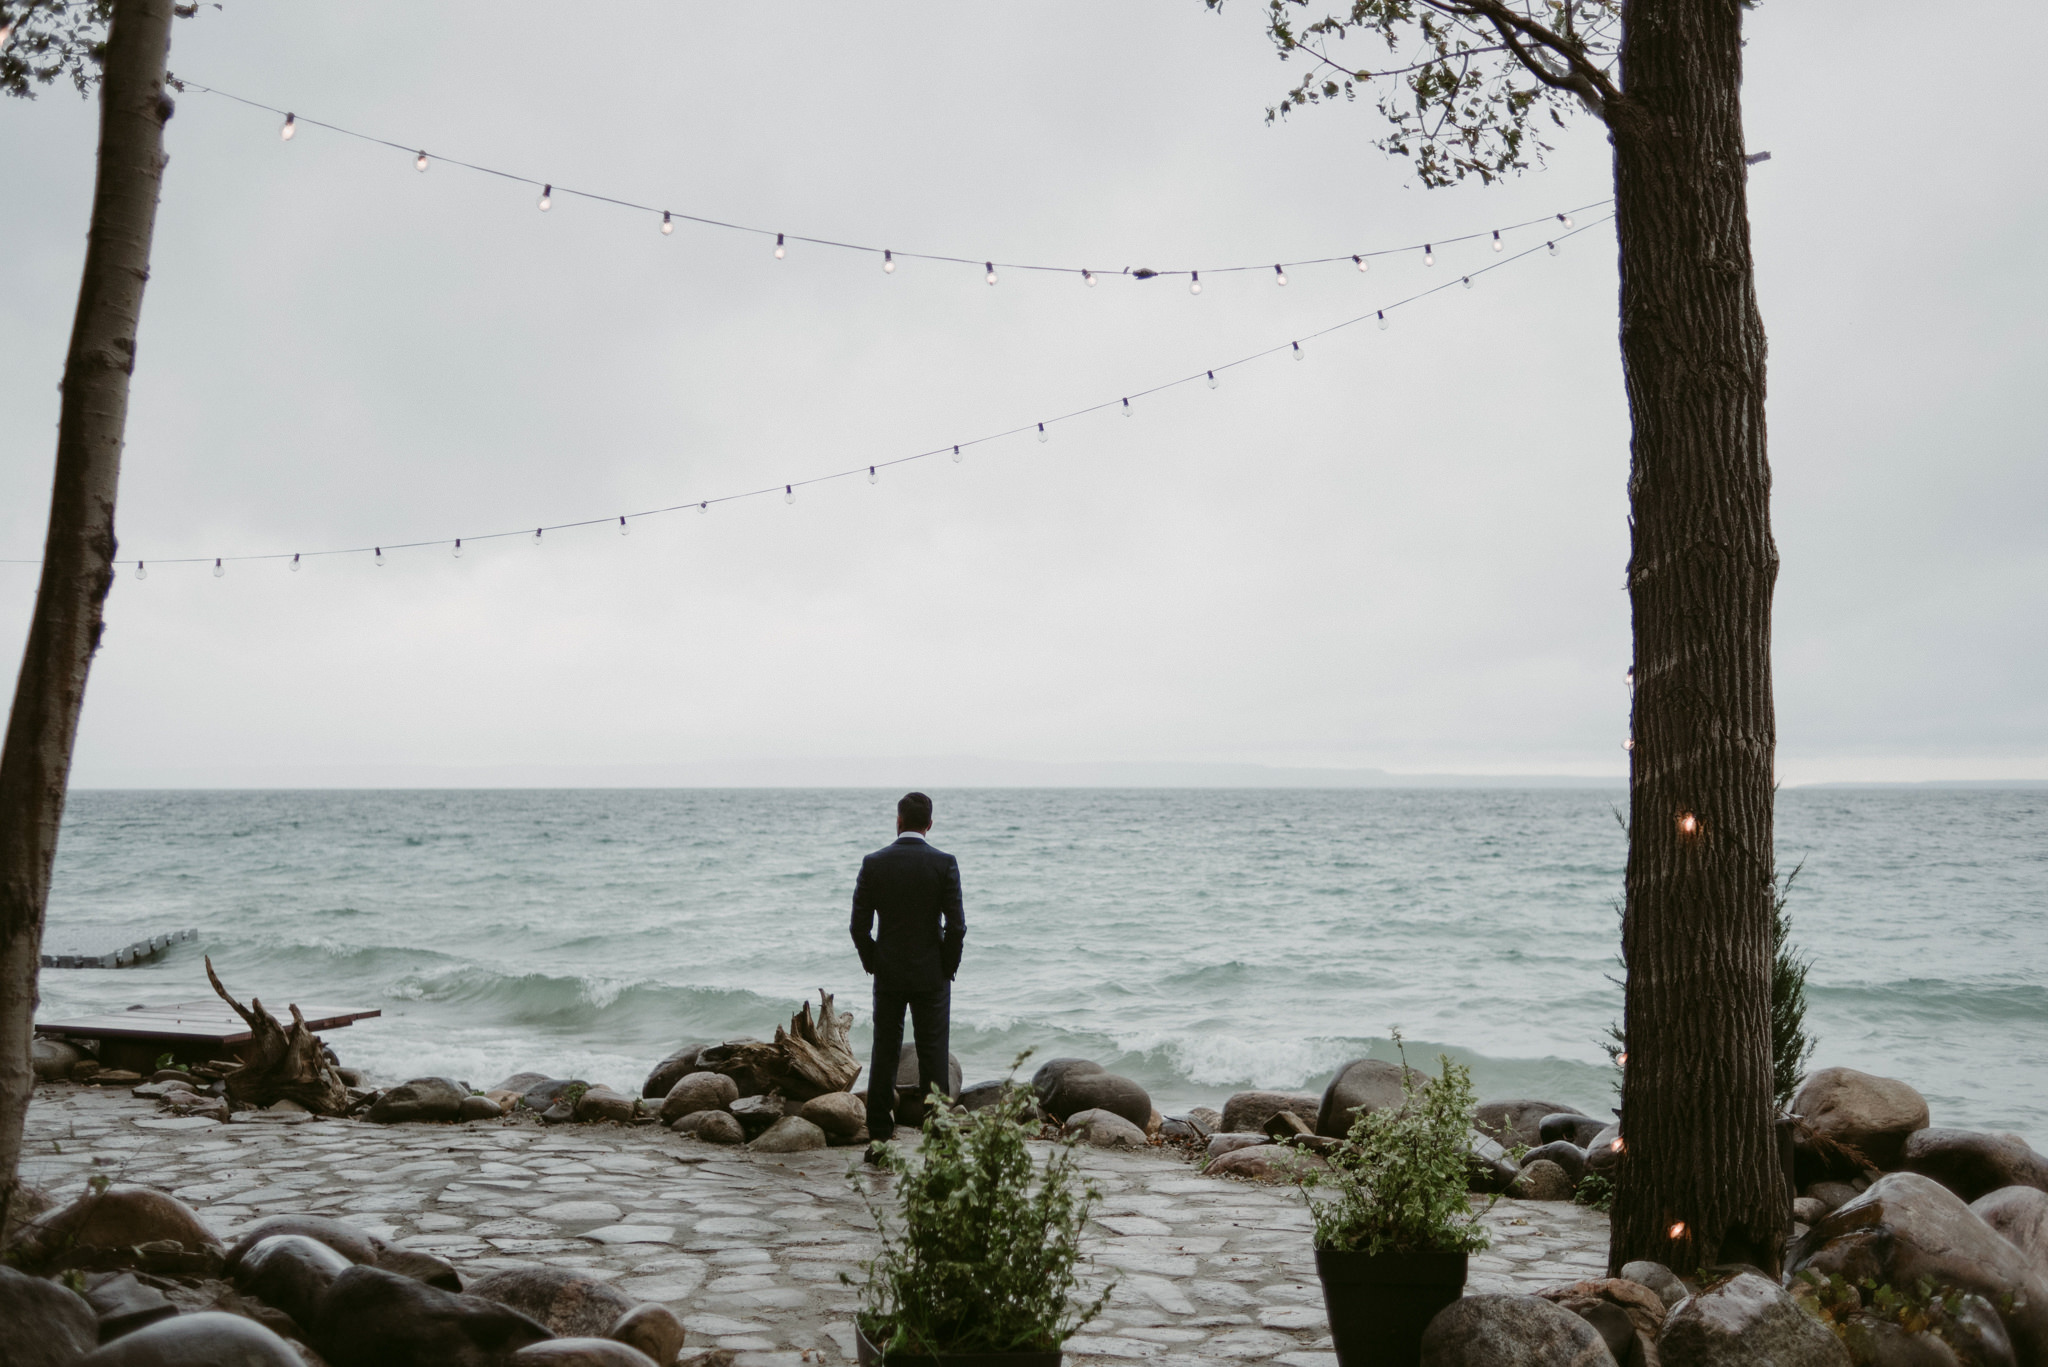 Groom looking out onto lake waiting for bride